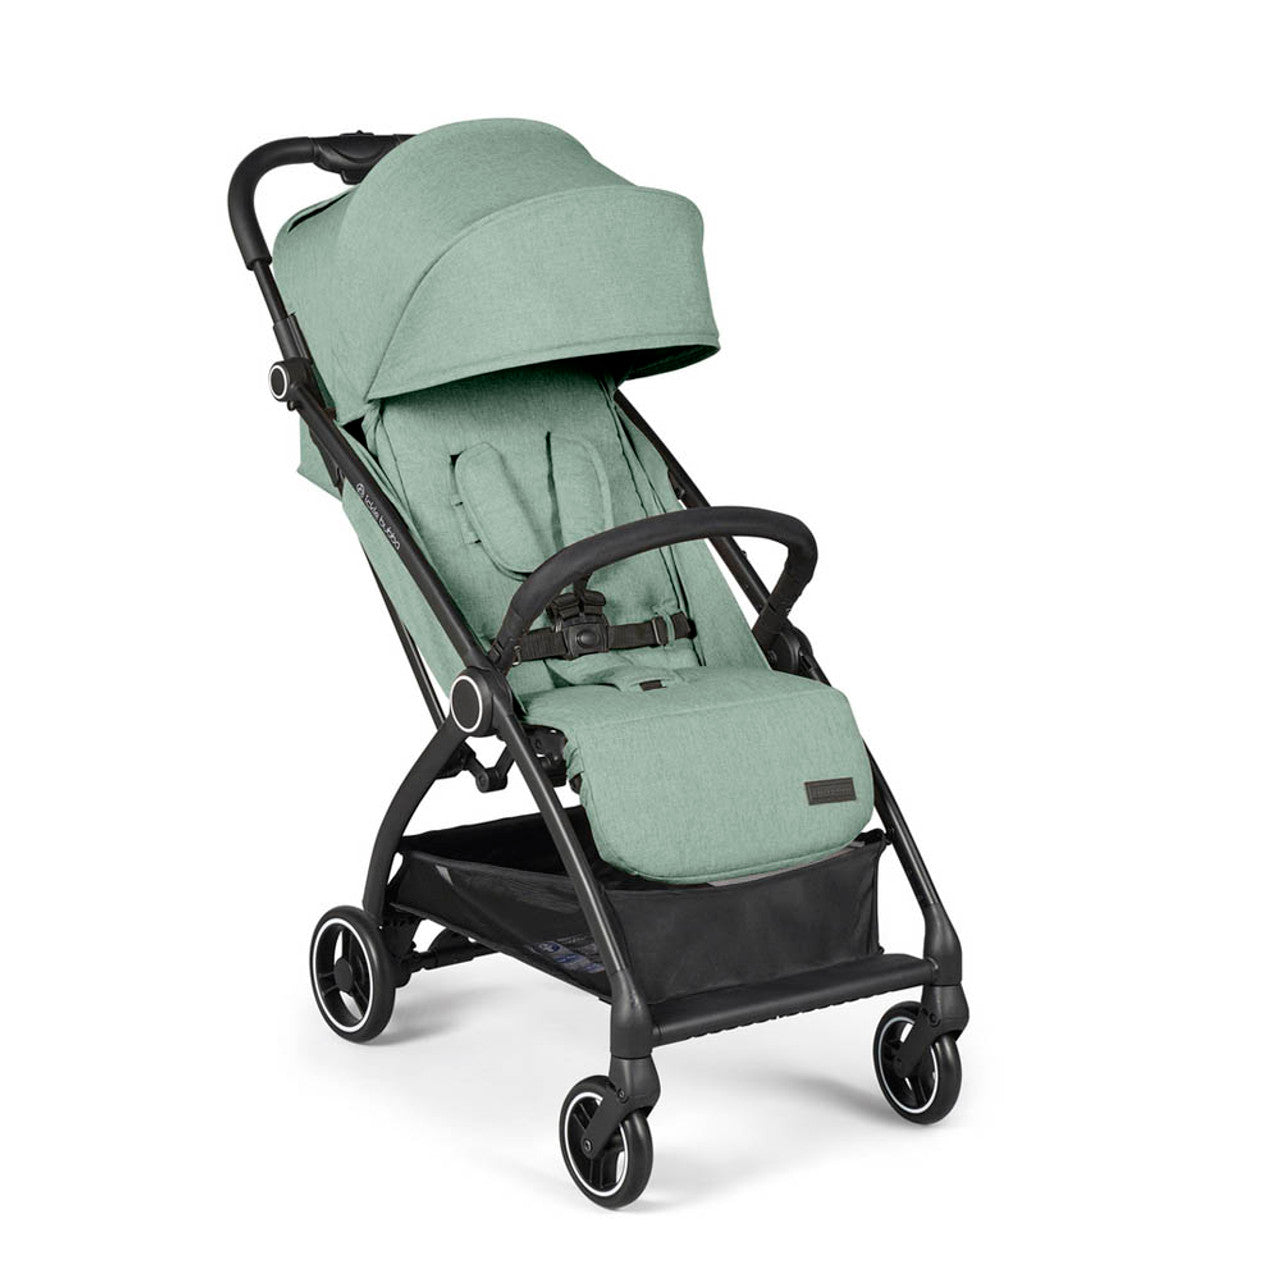 Ickle Bubba Aries Max Autofold Stroller - Sage Green - For Your Little One